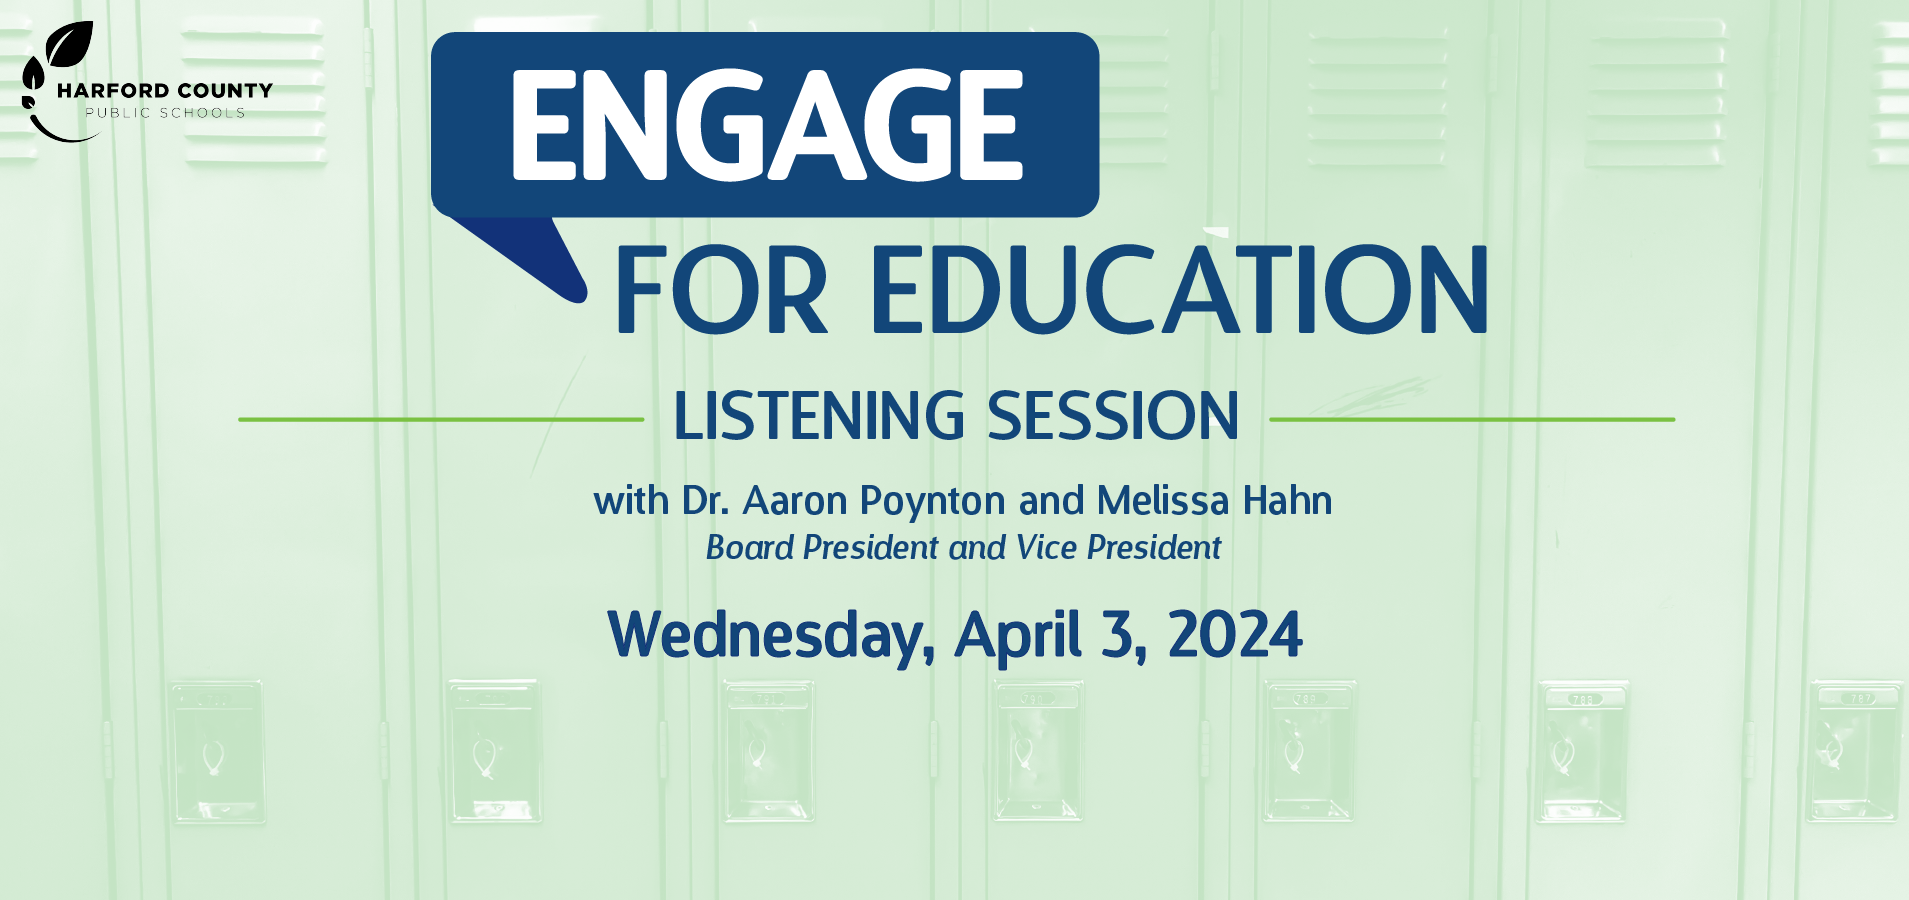 Engage for Education listening sessions with Dr. Aaron Poynton and Melissa Hahn